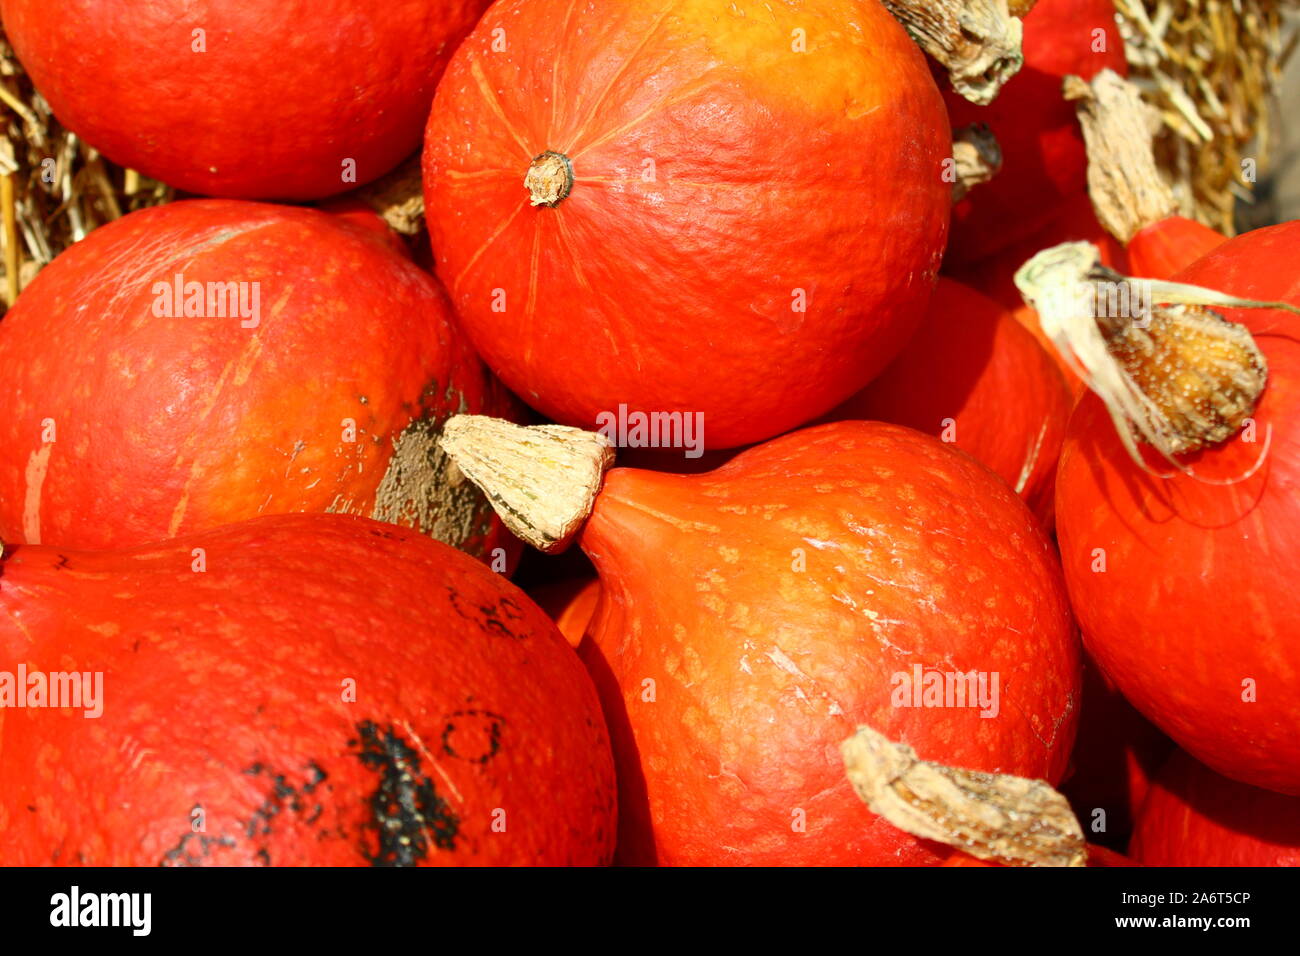 The picture shows many orange pumpkins Stock Photo